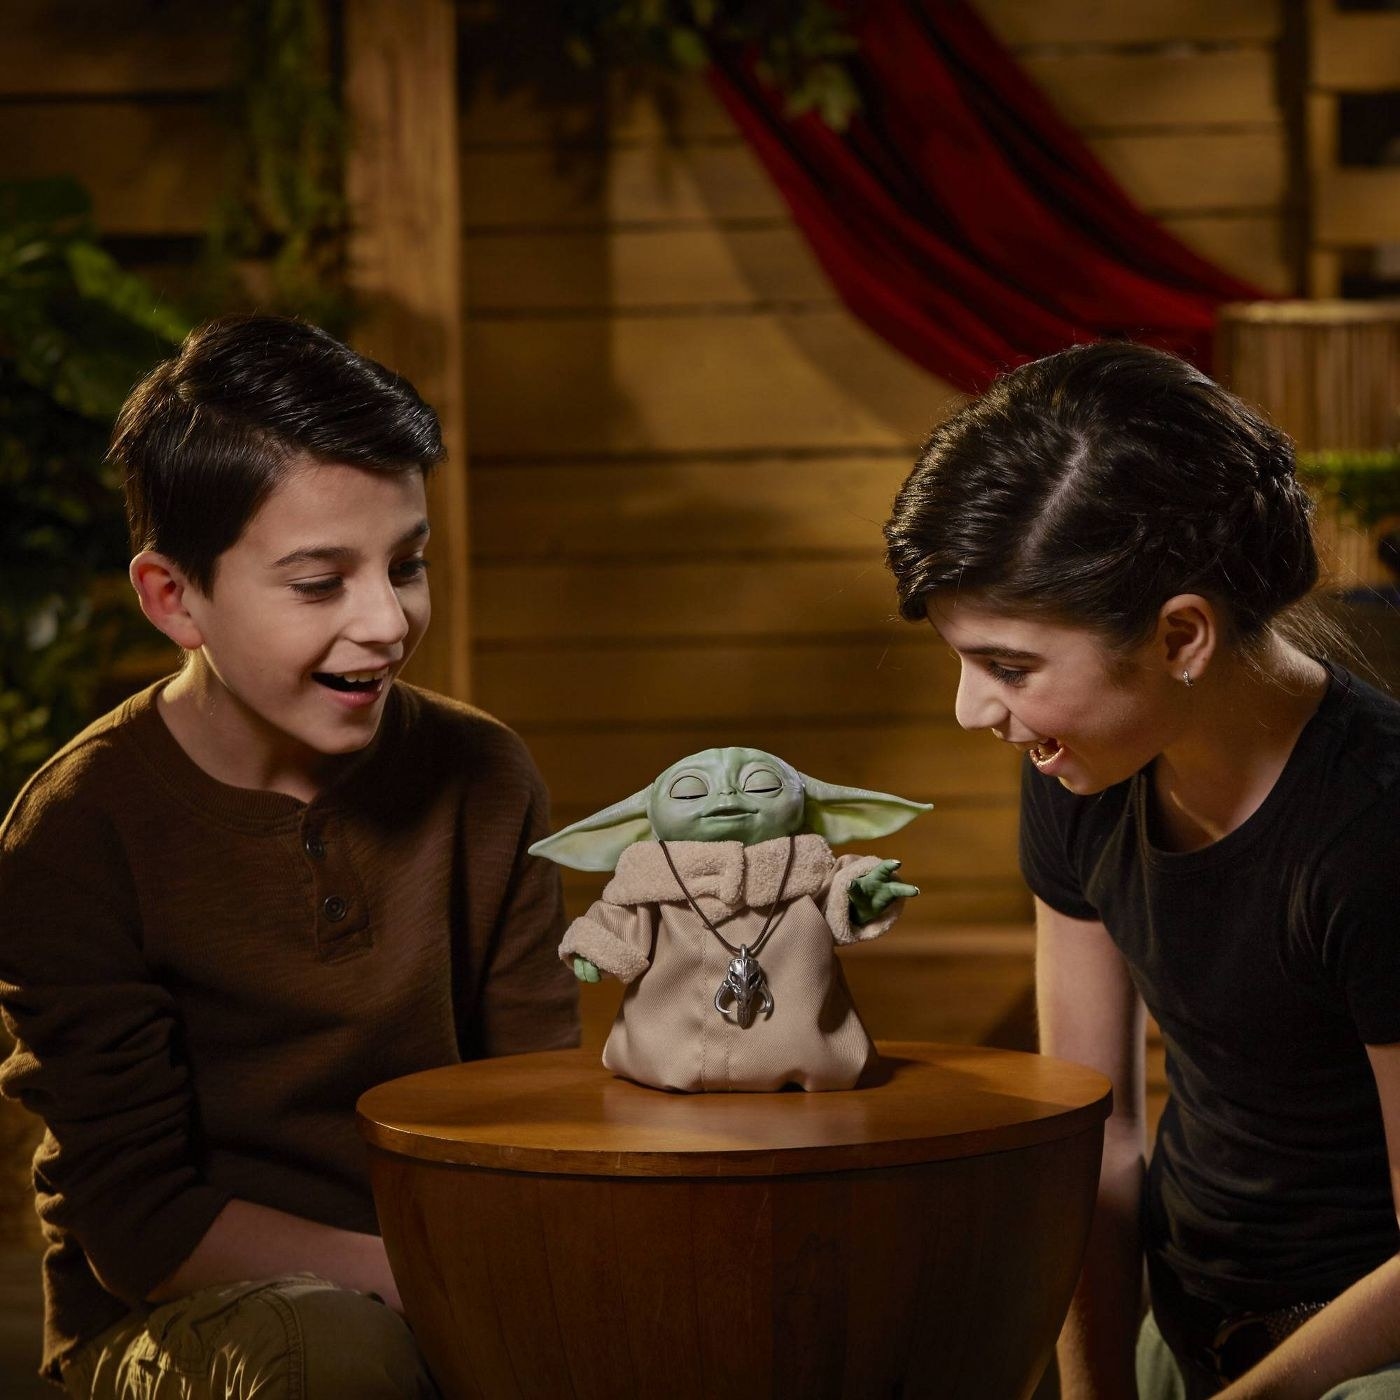 Two kids playing with a Baby Yoda doll